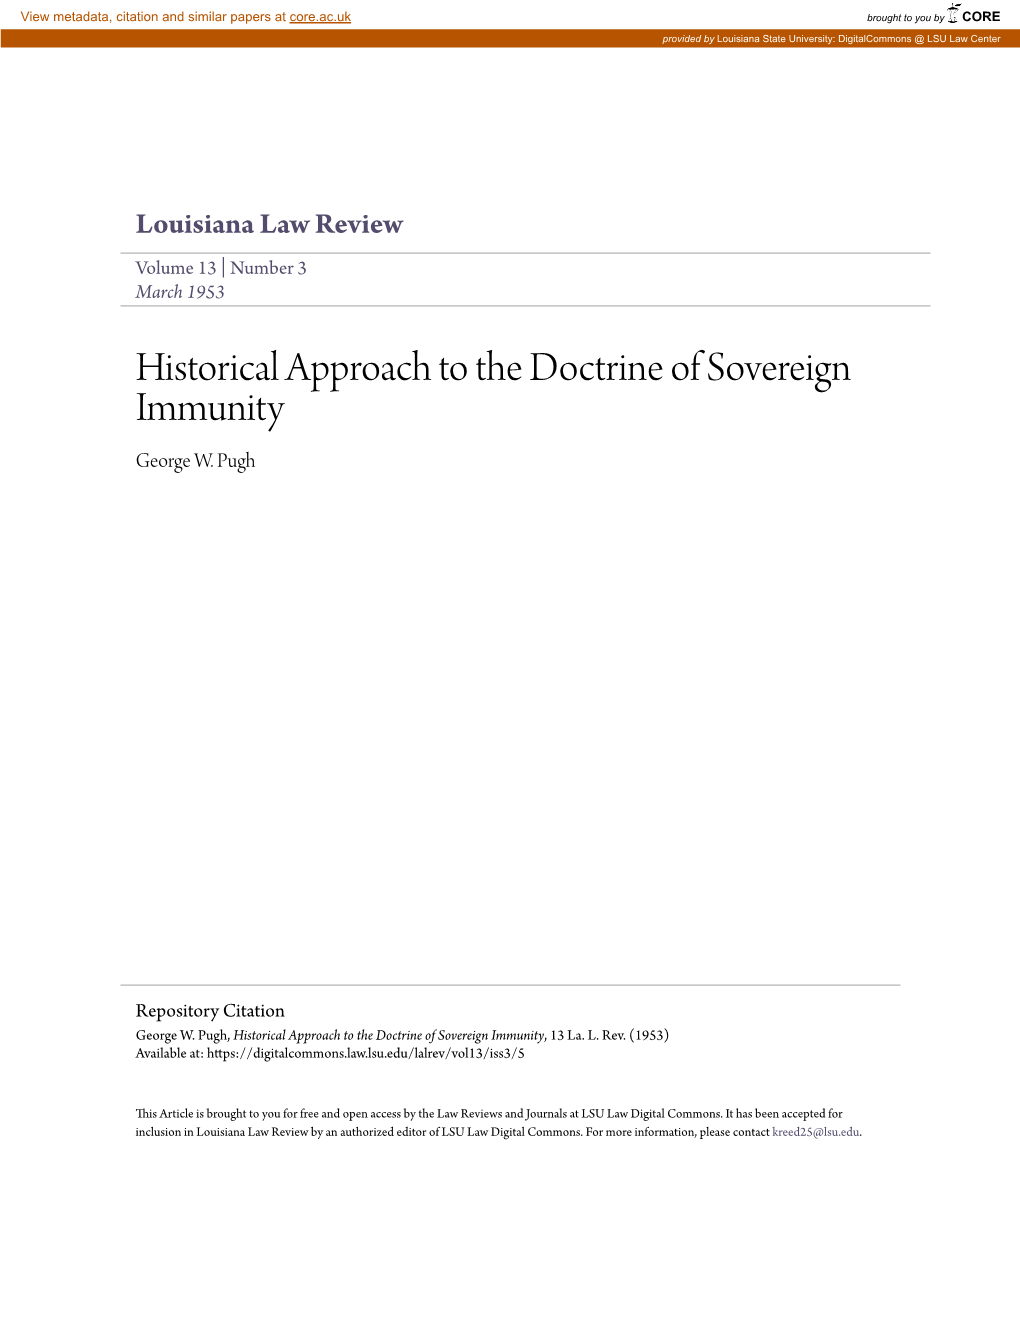 Historical Approach to the Doctrine of Sovereign Immunity George W